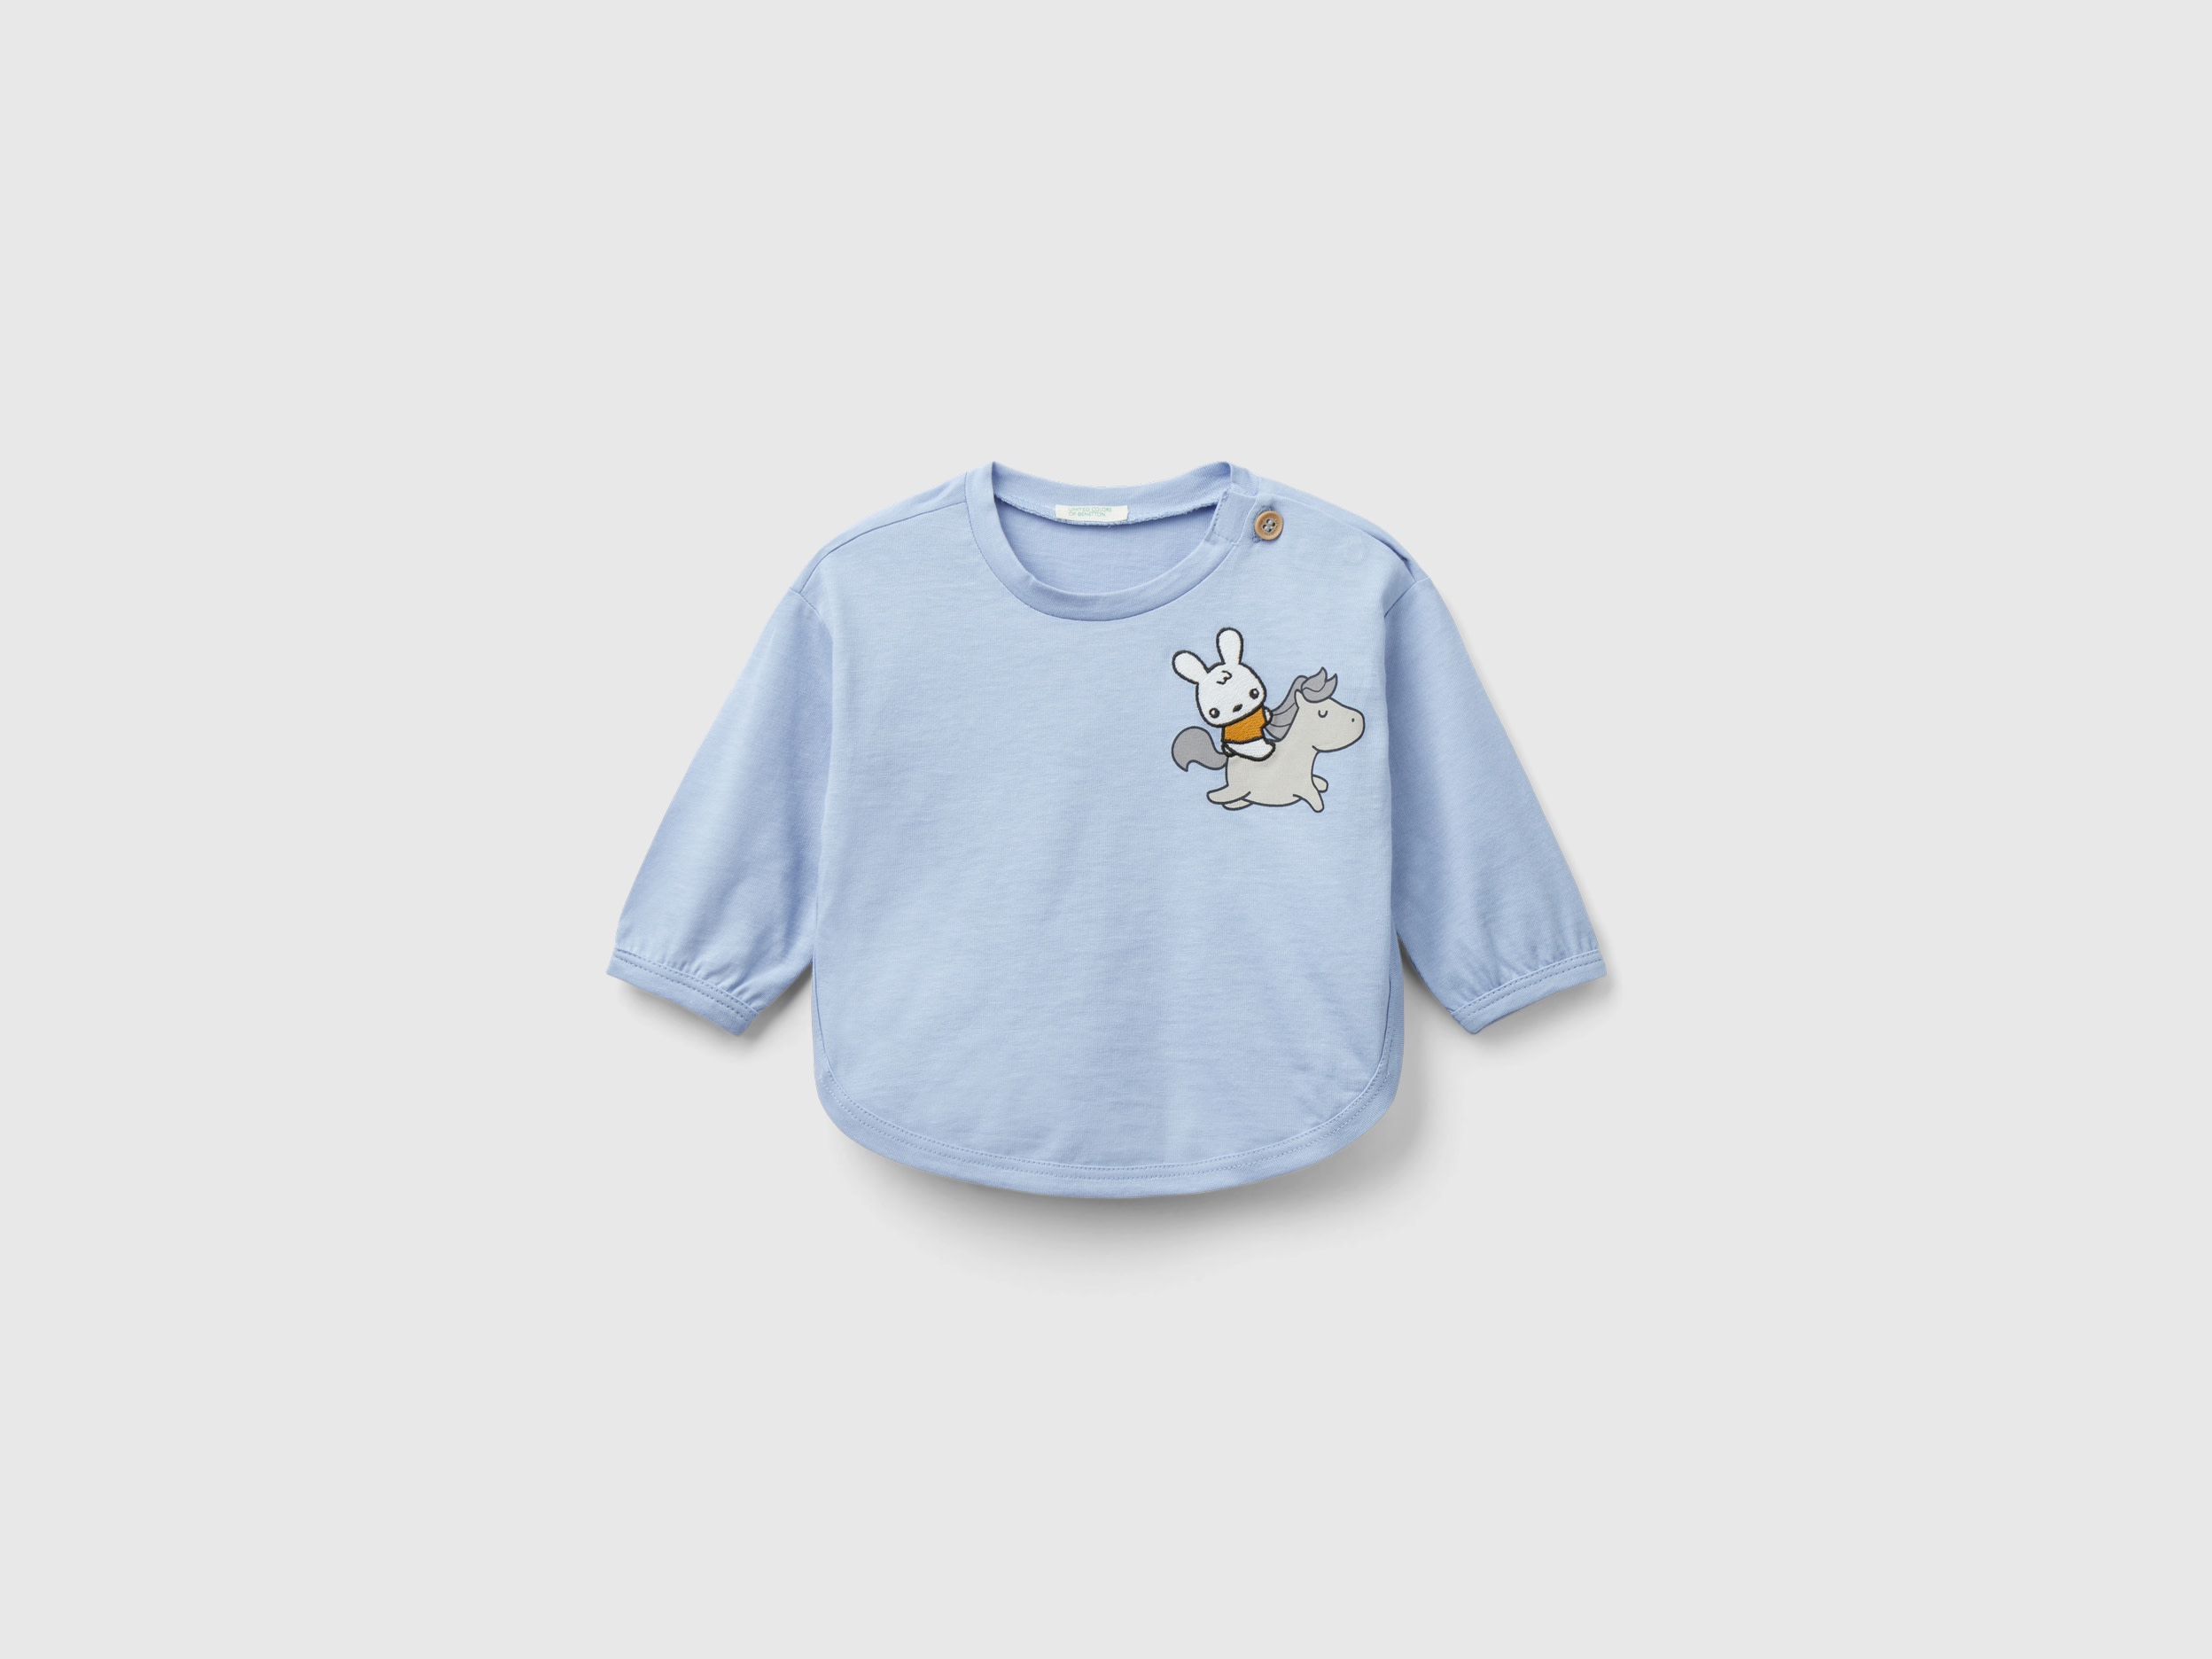 Image of Benetton, T-shirt In Organic Cotton With Print, size 56, Sky Blue, Kids